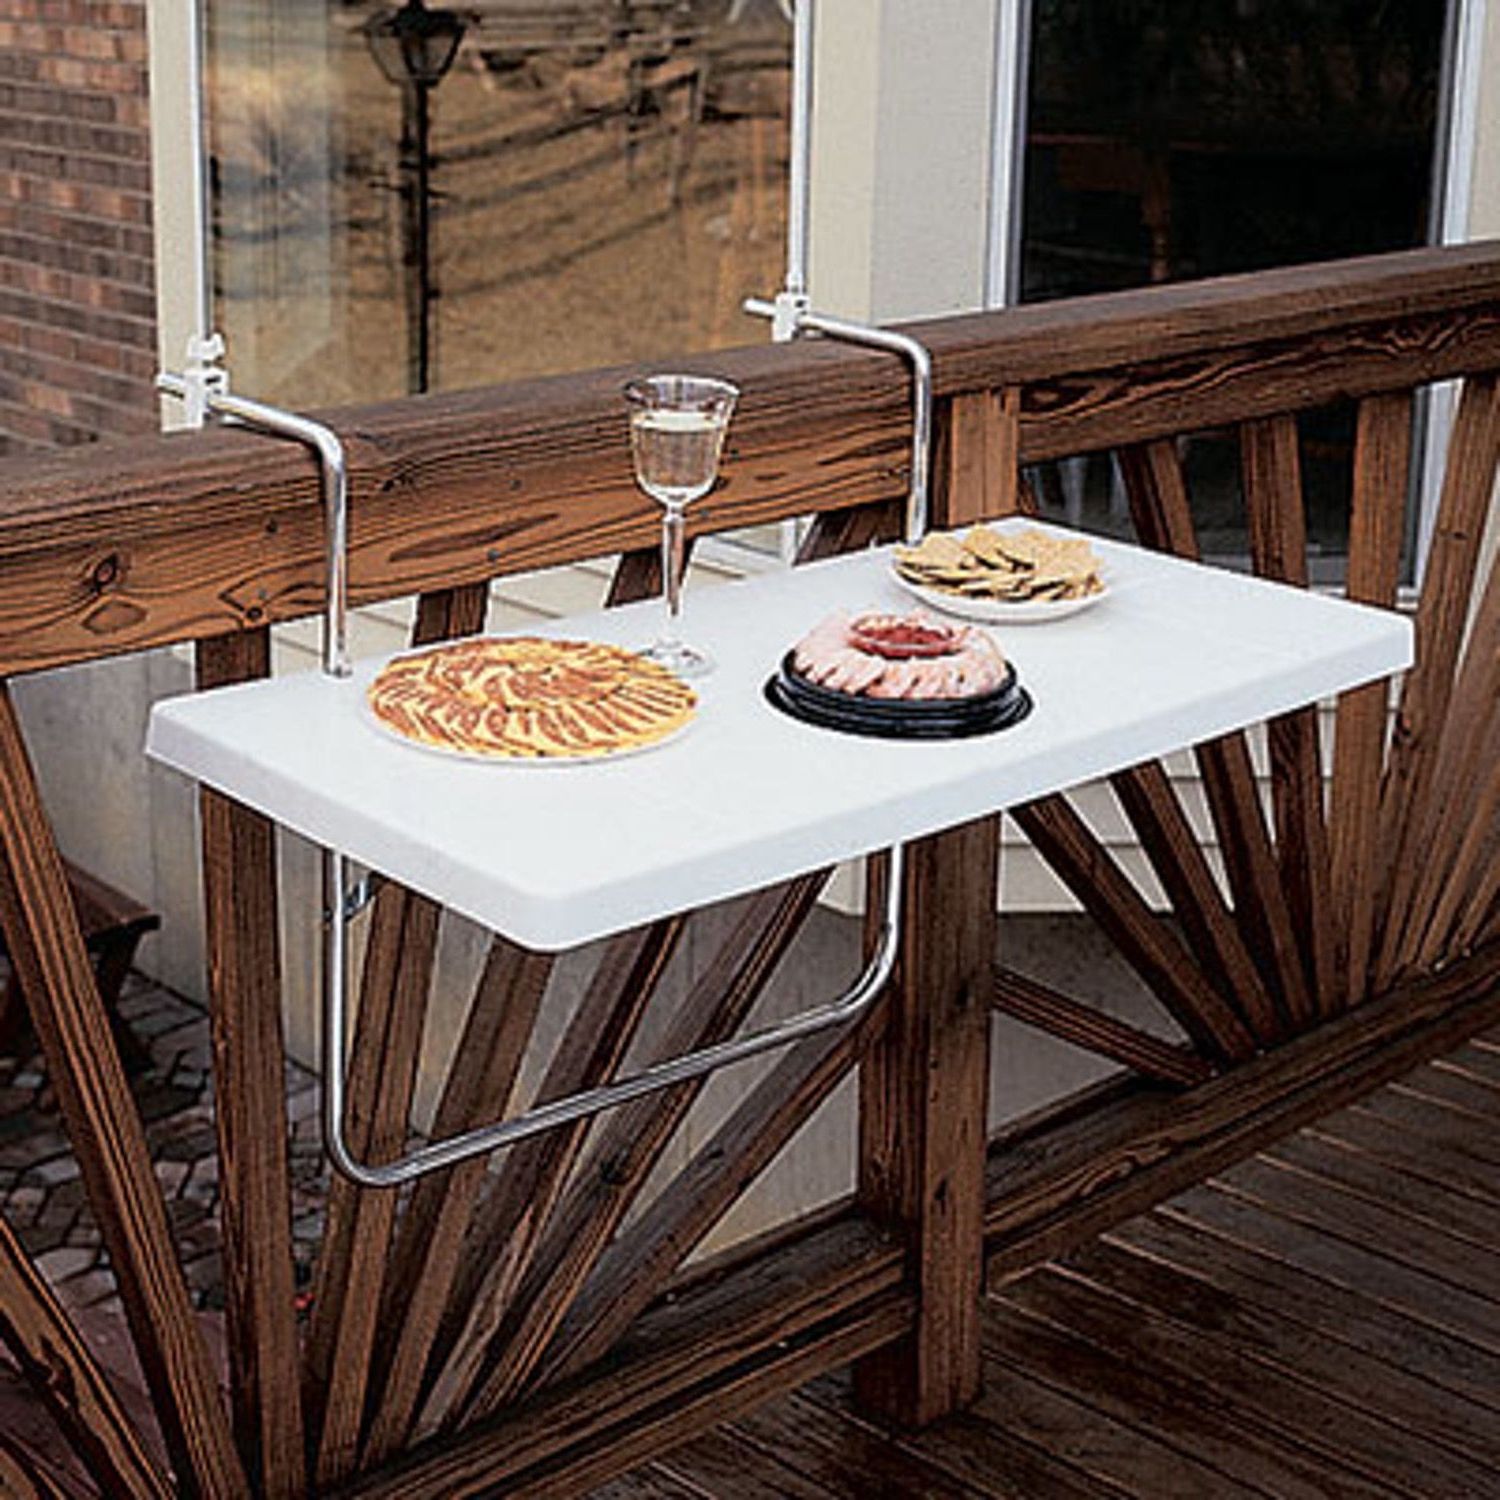 Latest Folding Balcony Table: Innovation Or Eyesore? (View 14 of 15)